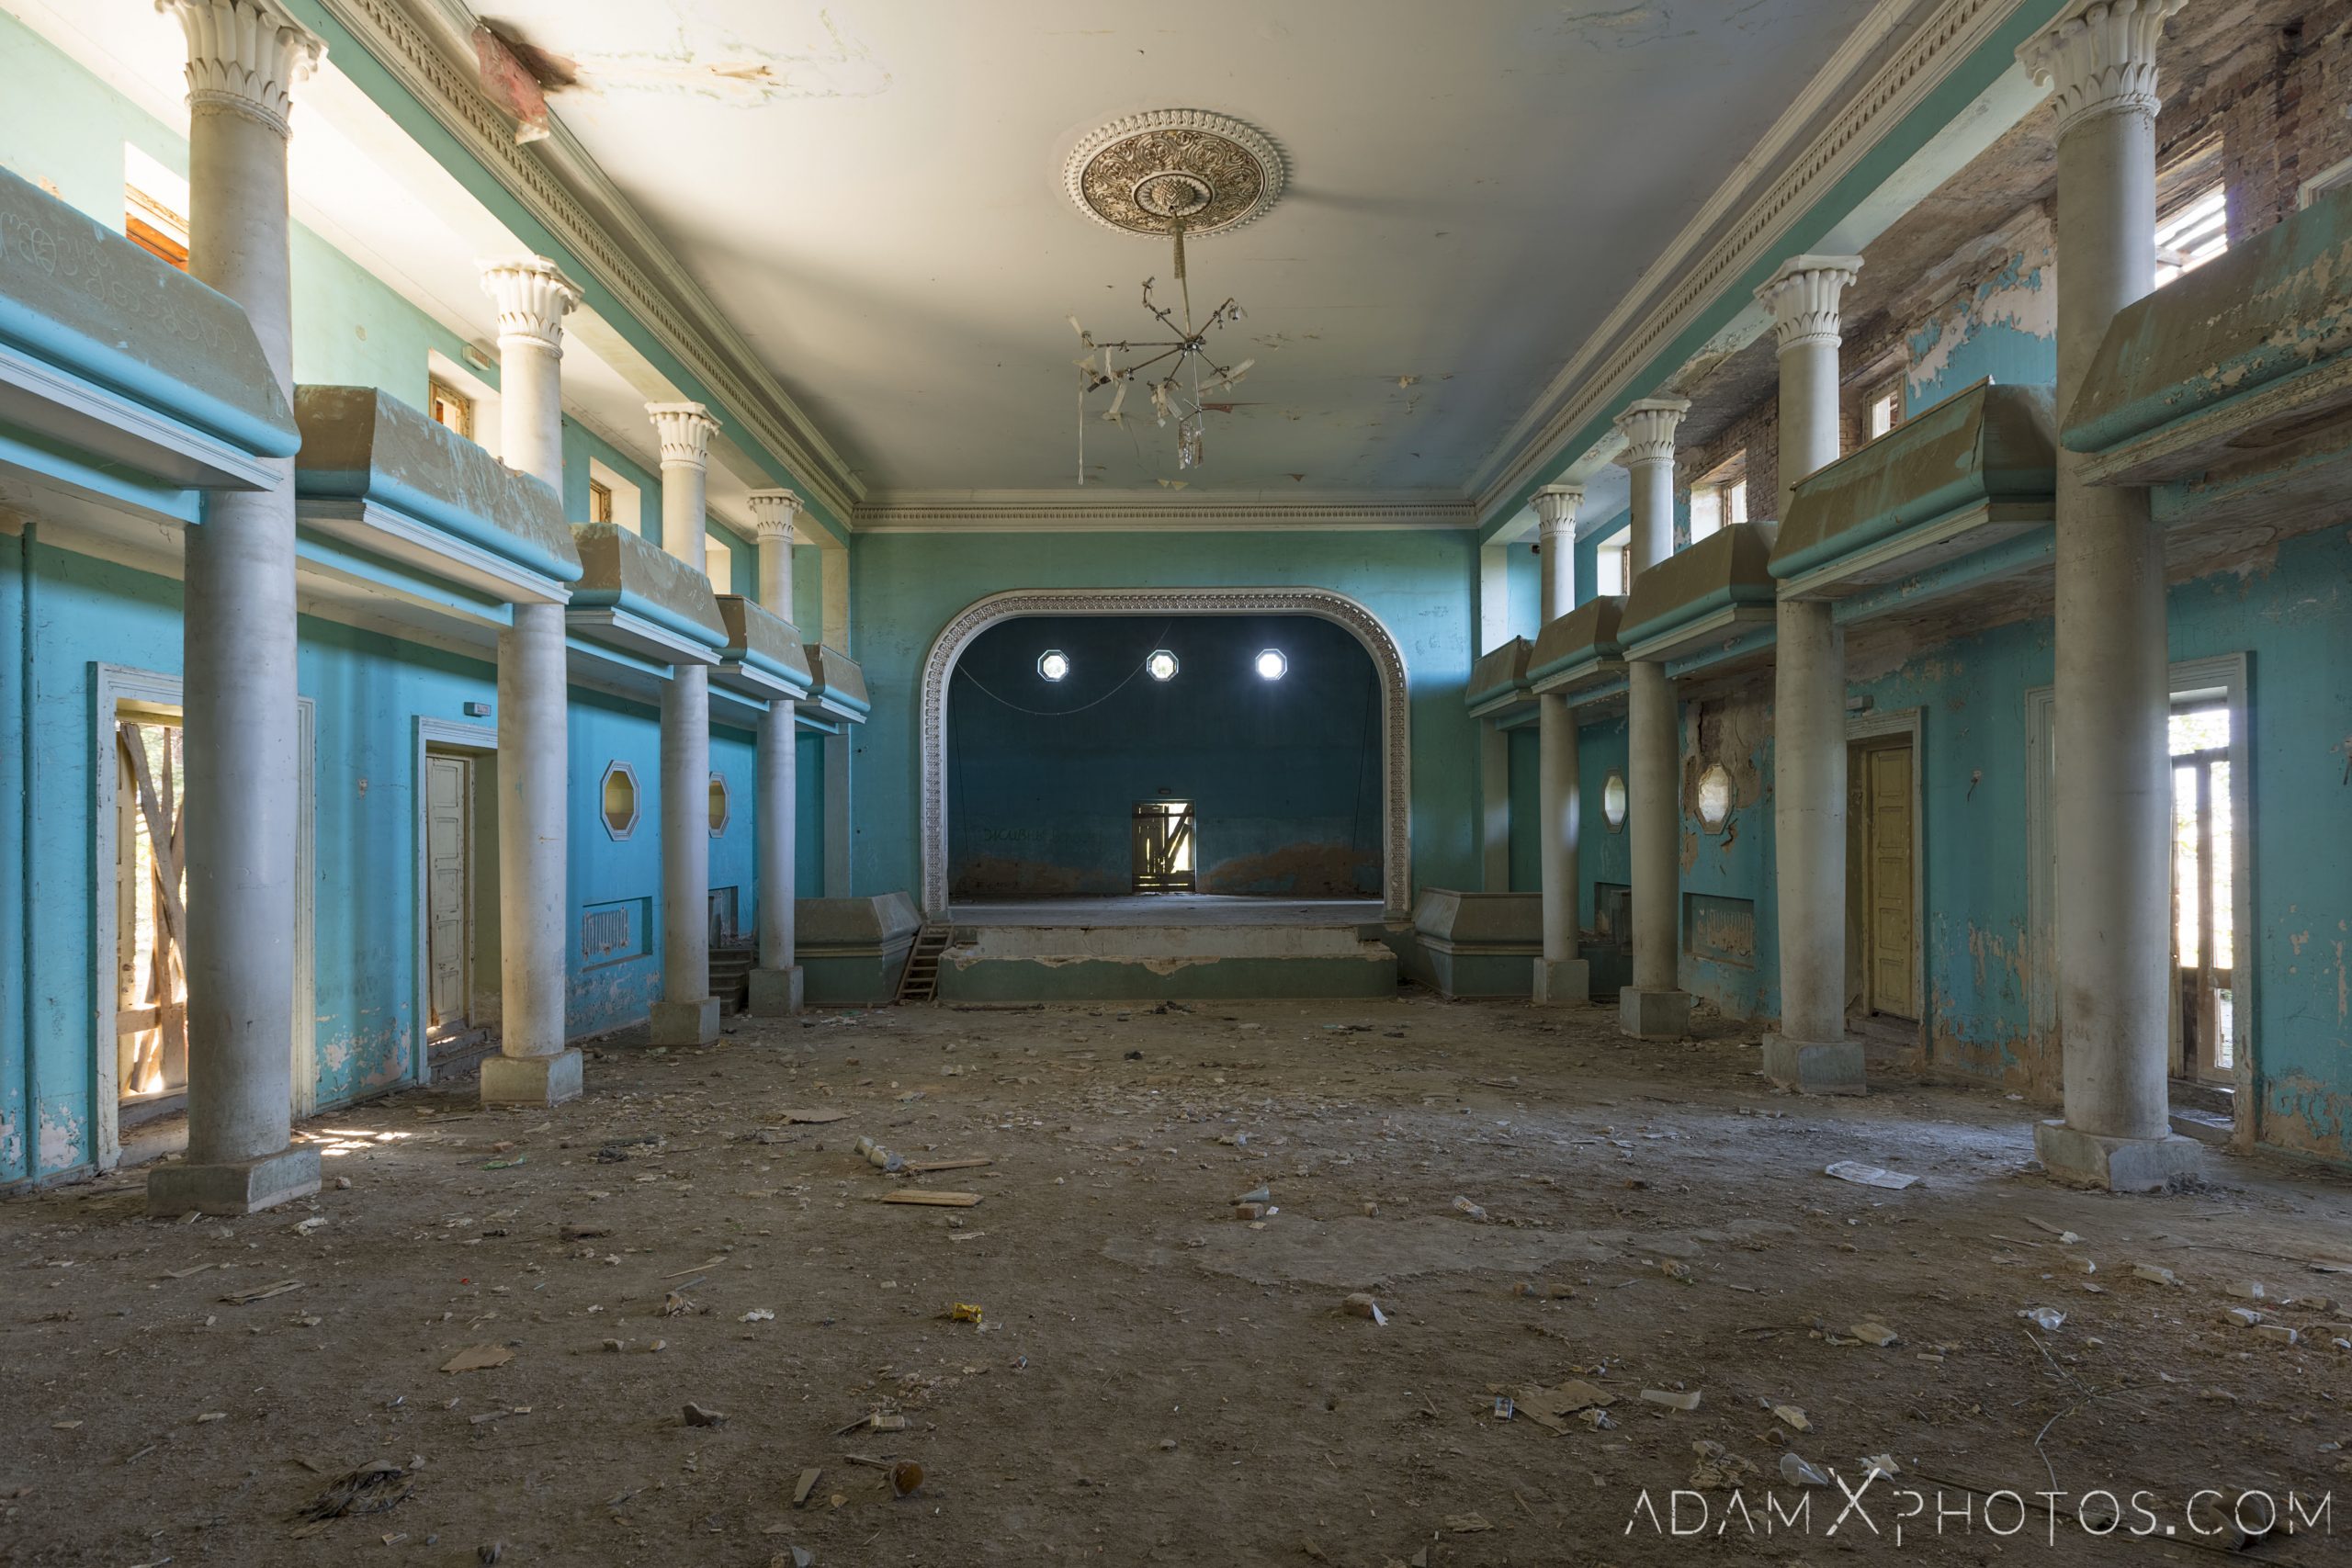 main hall and stage House of Culture Palace Blue rural Soviet era Georgia Adam X AdamXPhotos Urbex Urban Exploration 2018 Abandoned Access History decay ruins lost forgotten derelict location creepy haunting eerie security